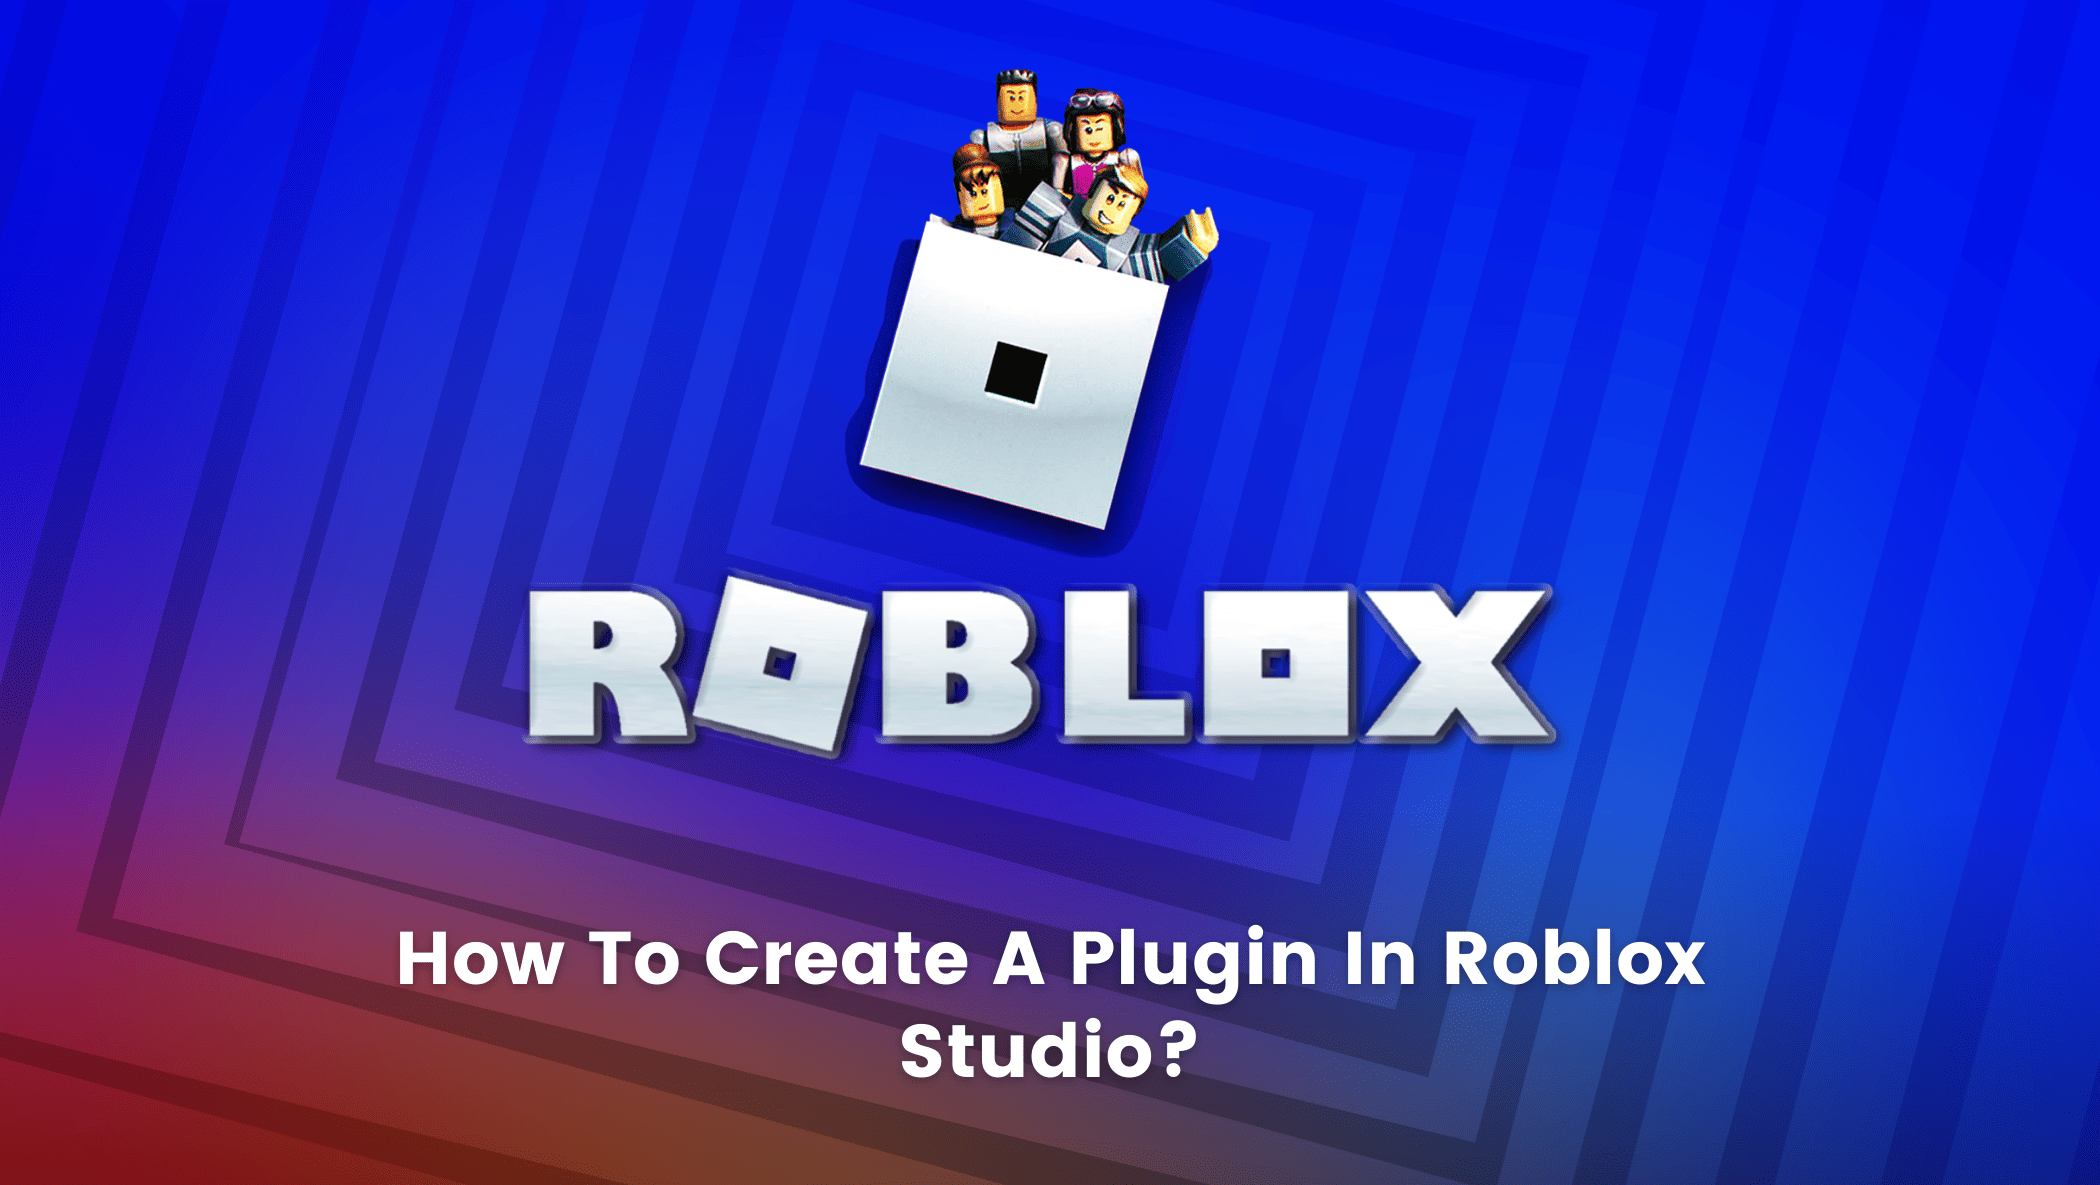 6 Easy Ways to Install Roblox and Roblox Studio